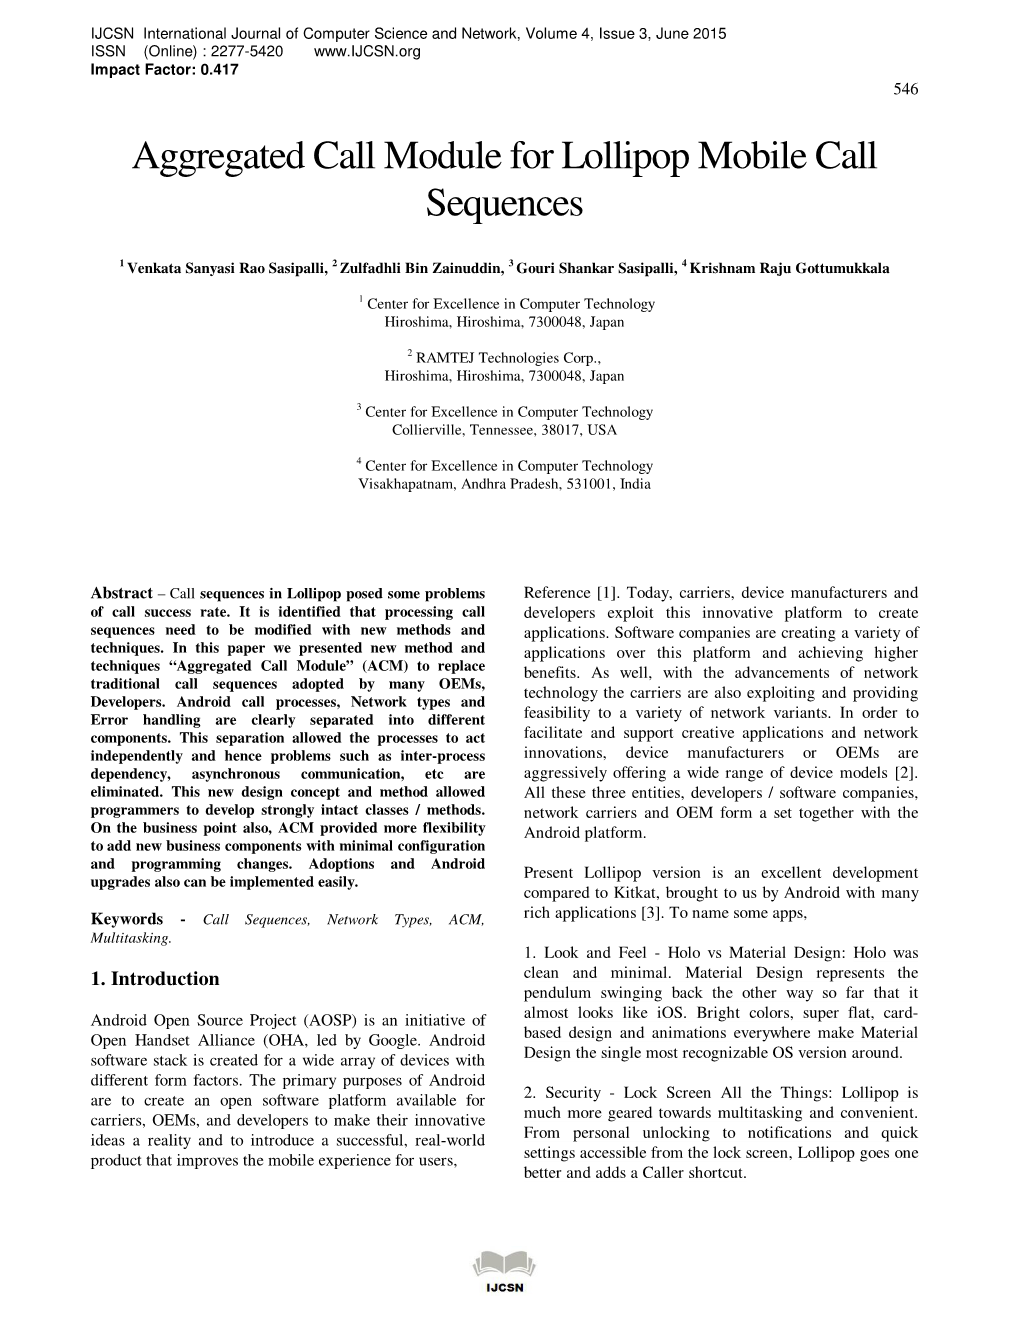 Aggregated Call Module for Lollipop Mobile Call Sequences